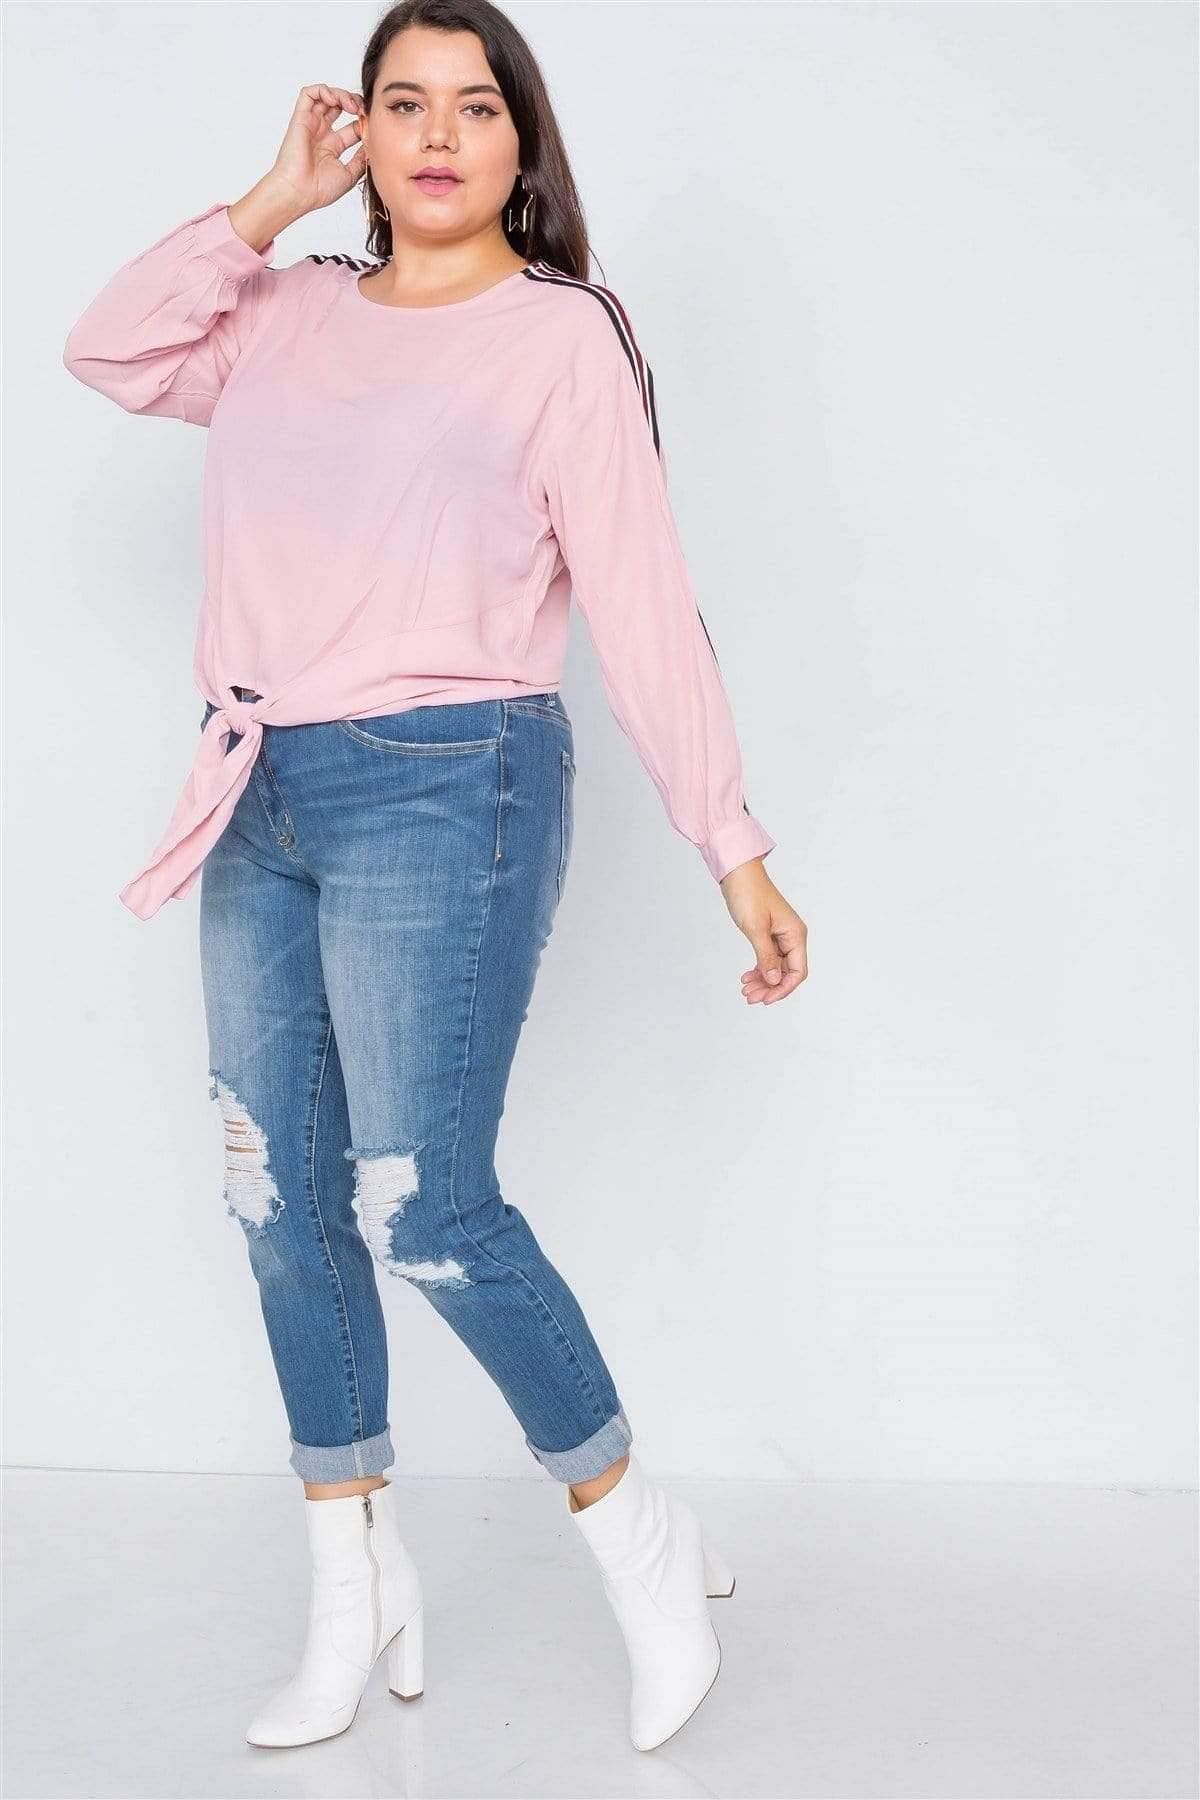 Pink Plus Size Long Sleeve Stripe Top - Shopping Therapy, LLC top